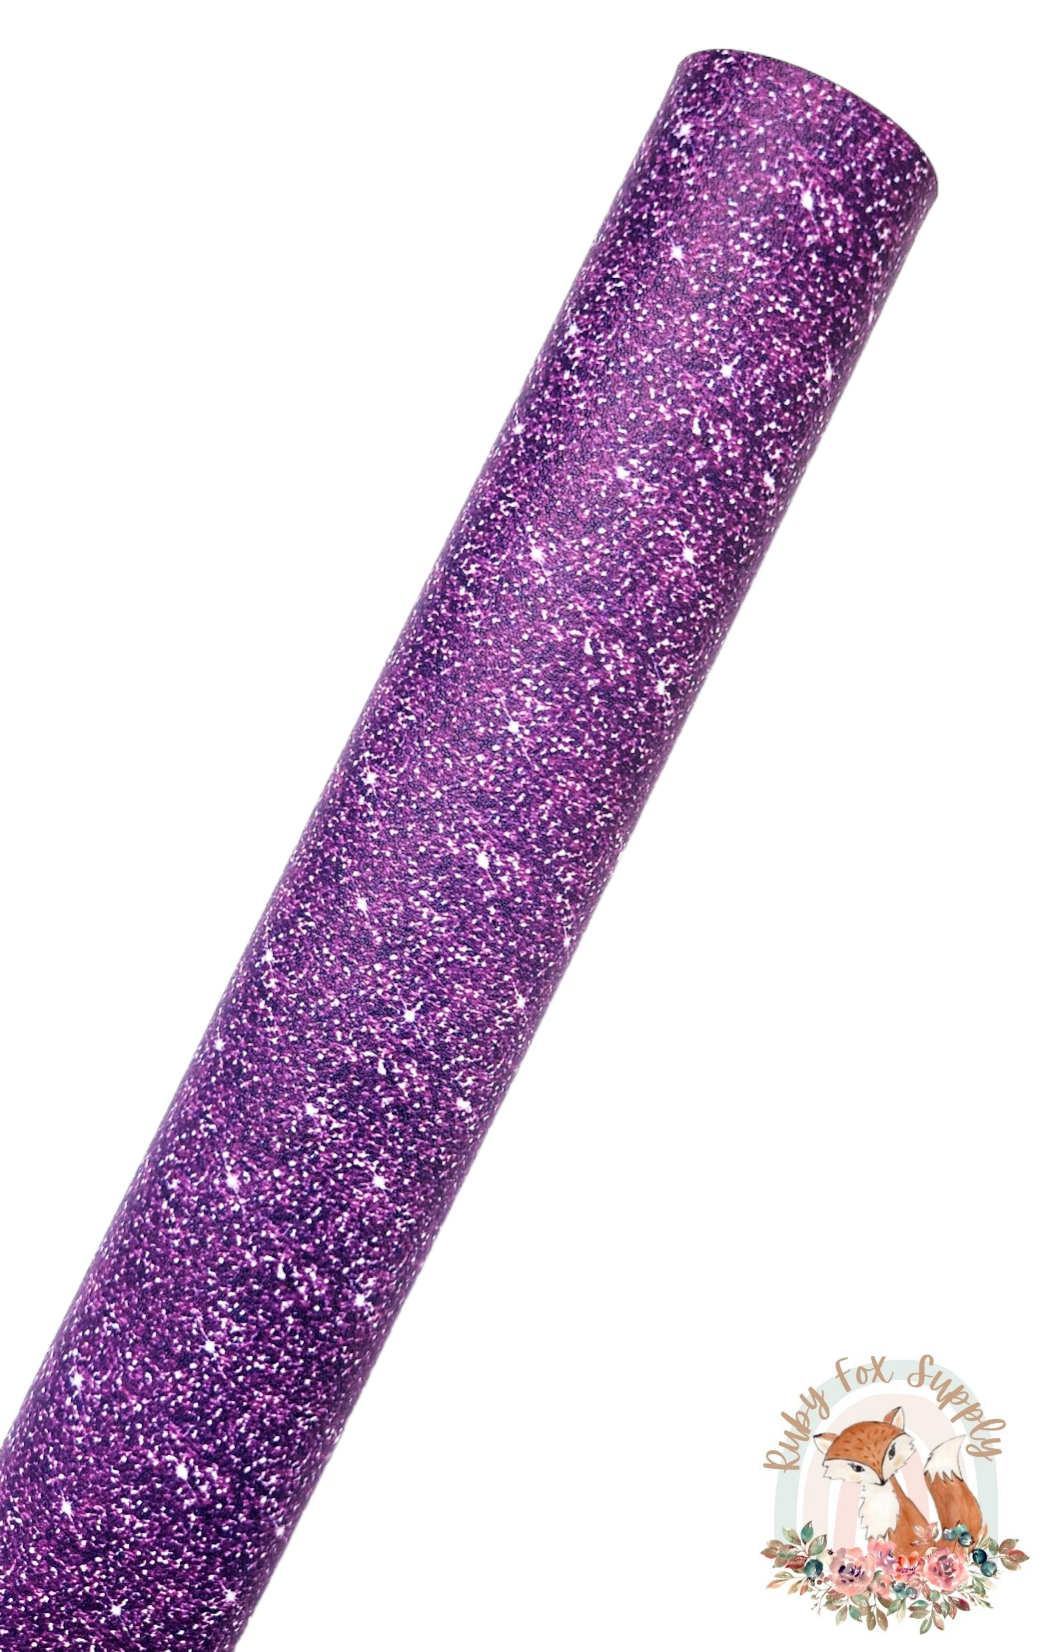 Purple Faux Sparkly Glitter 9x12 faux leather sheet